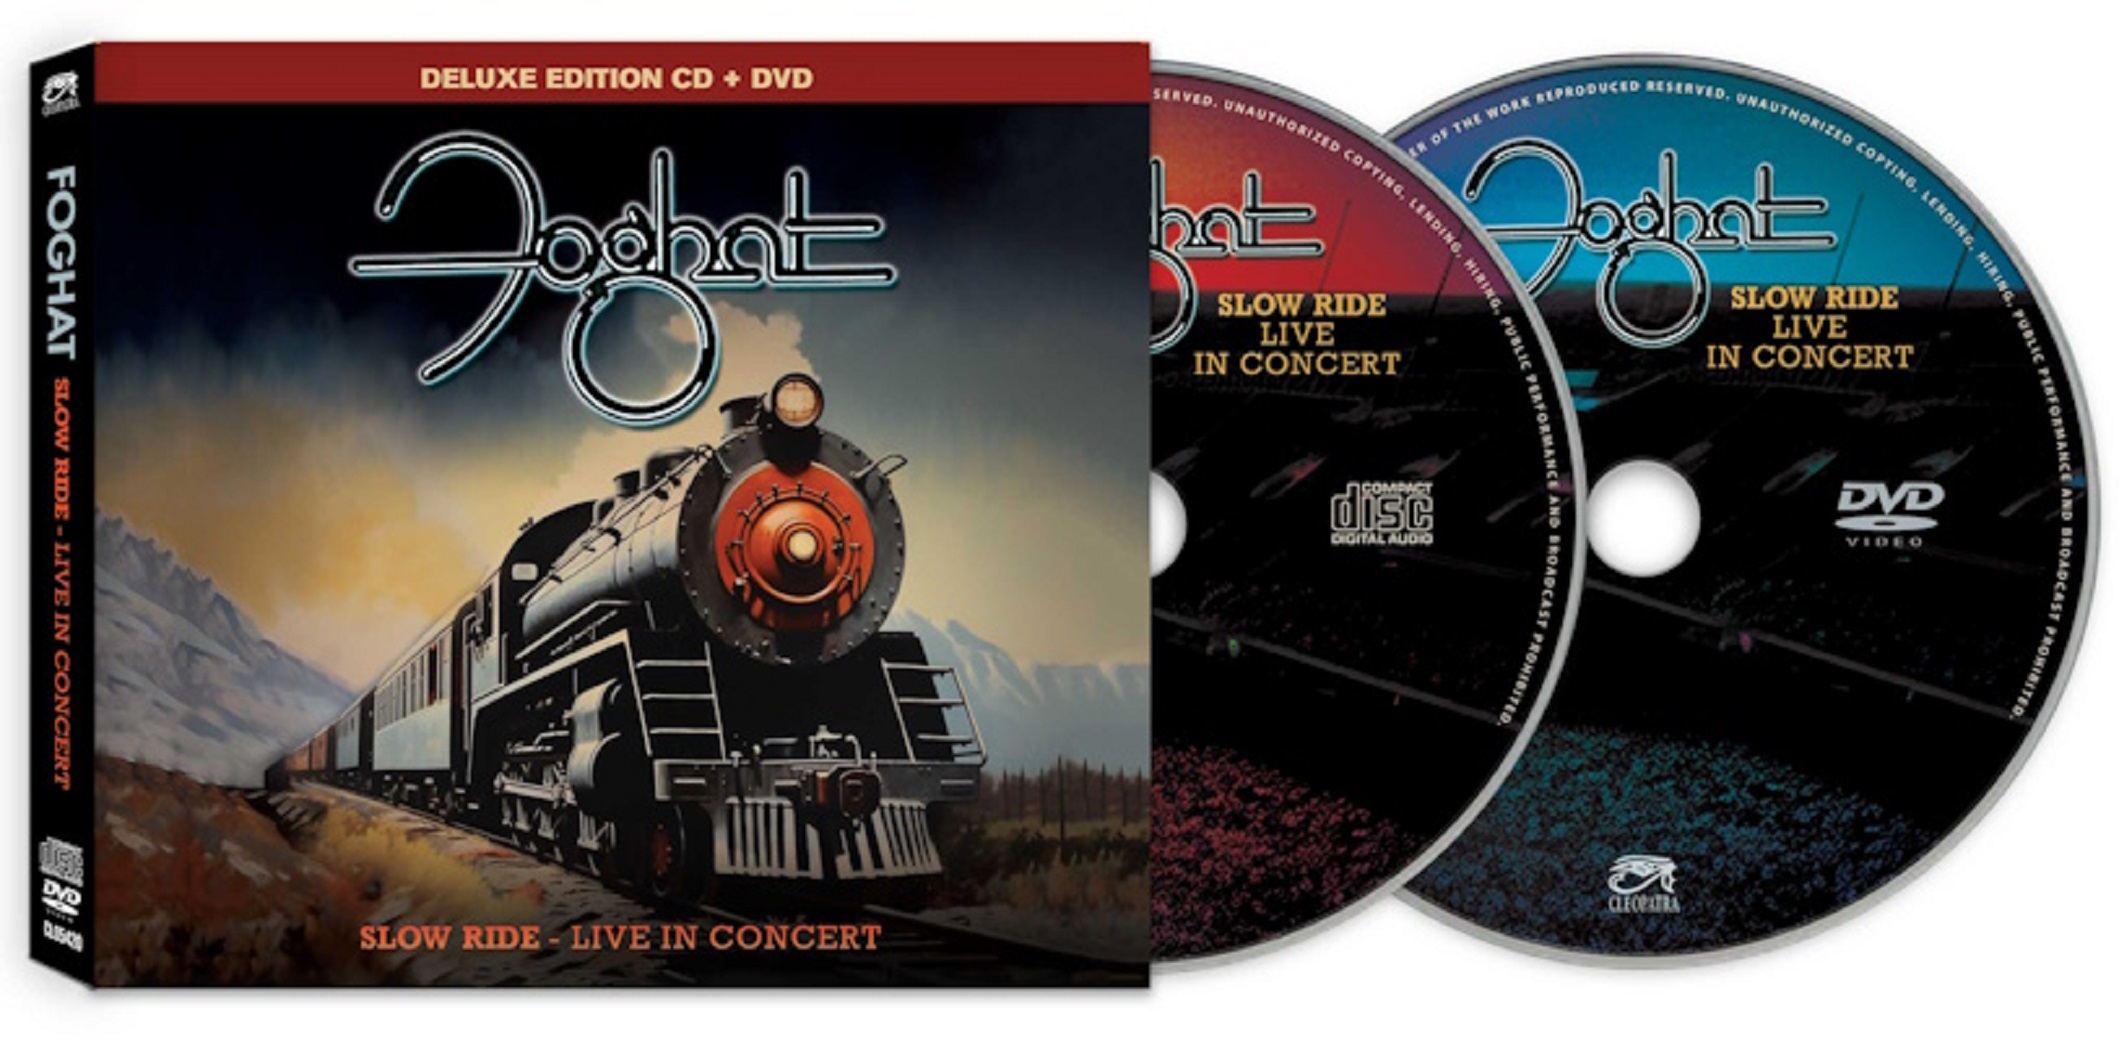 FOGHAT's Iconic 1999 Live Performance Immortalized In CD/DVD Set SLOW RIDE  - LIVE IN CONCERT! | Grateful Web